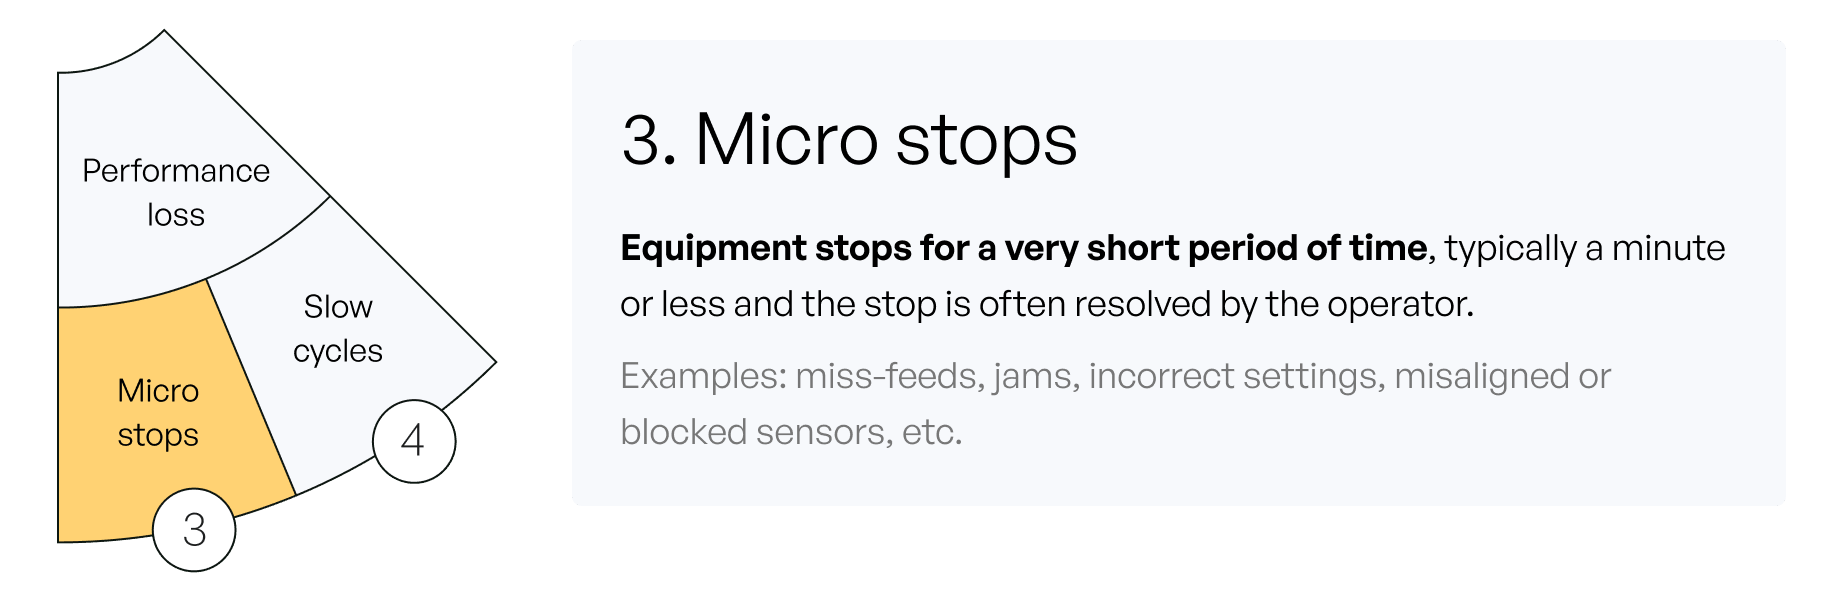 micro stops are when equipment stops for short period of time